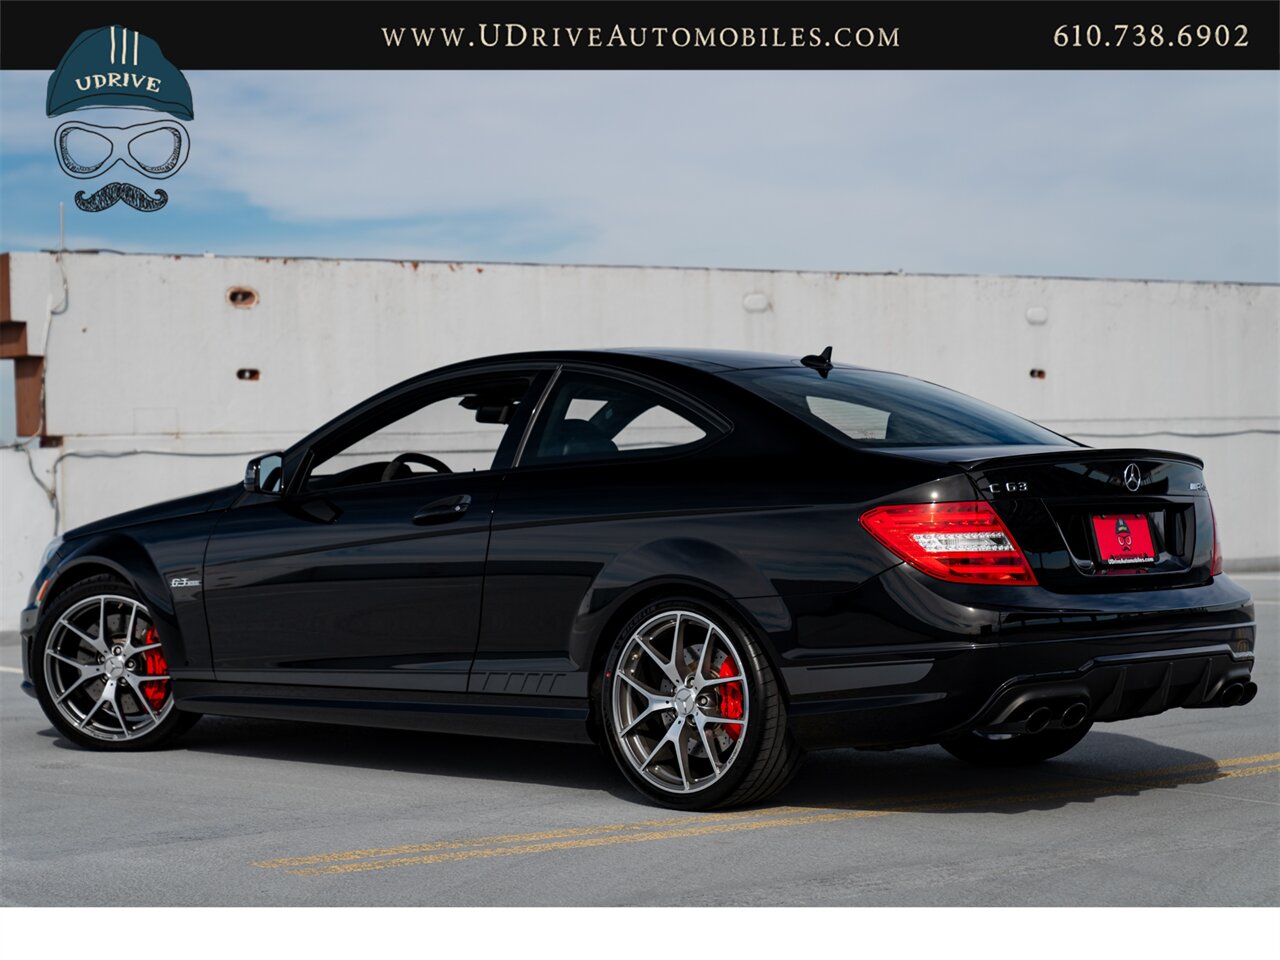 2015 Mercedes-Benz C63 AMG  Edition 507 17k Miles Pano Sunroof Locking Diff 507hp - Photo 4 - West Chester, PA 19382